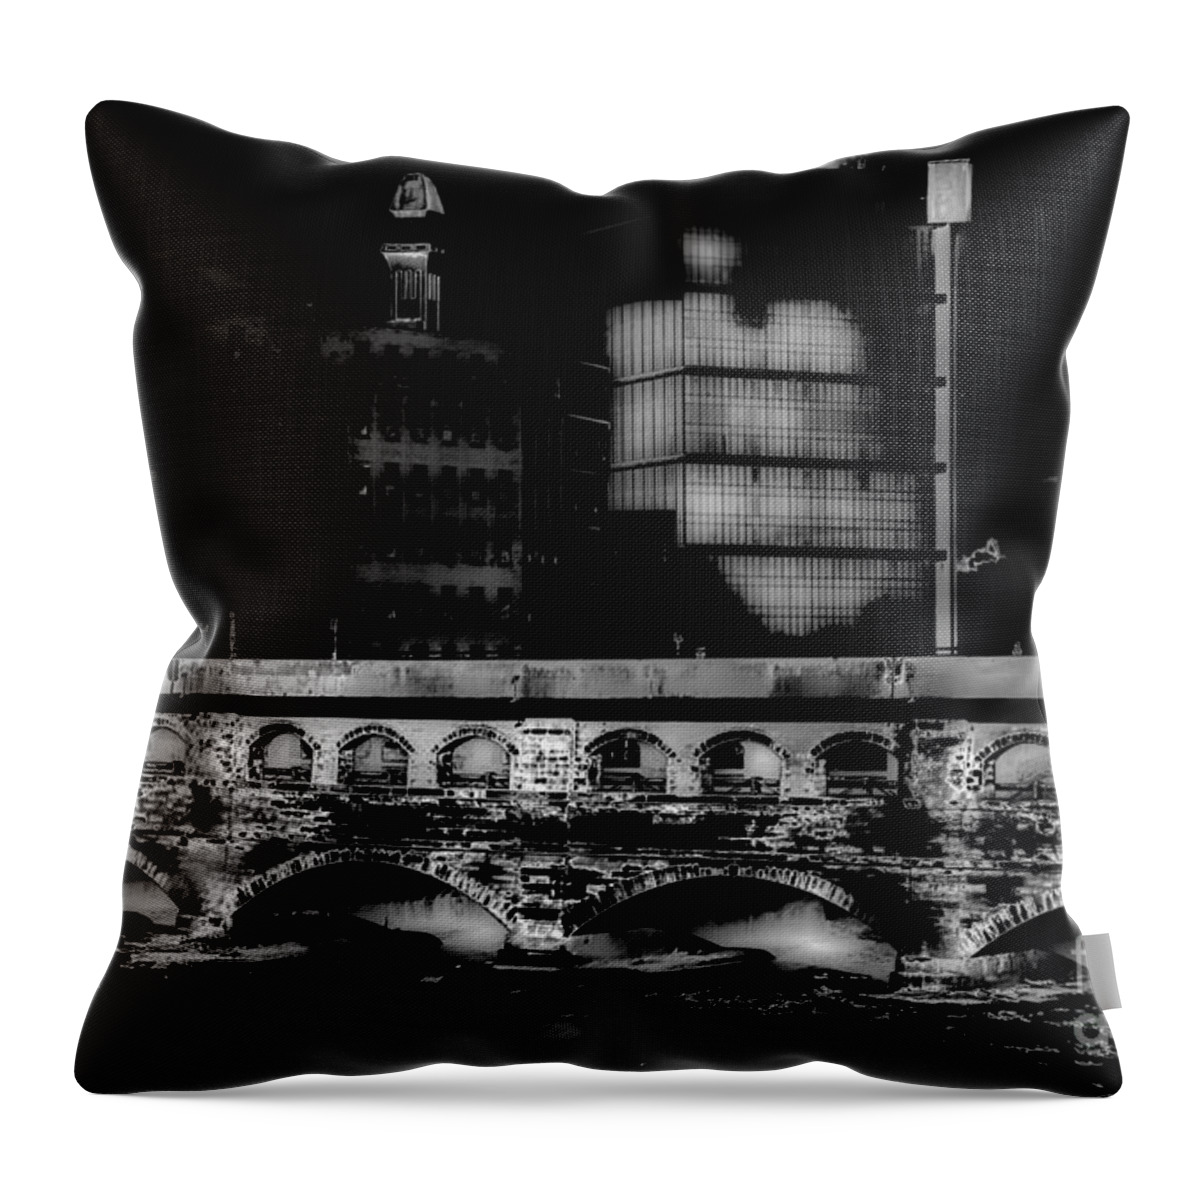 Aqueduct Throw Pillow featuring the photograph Aqueduct by William Norton